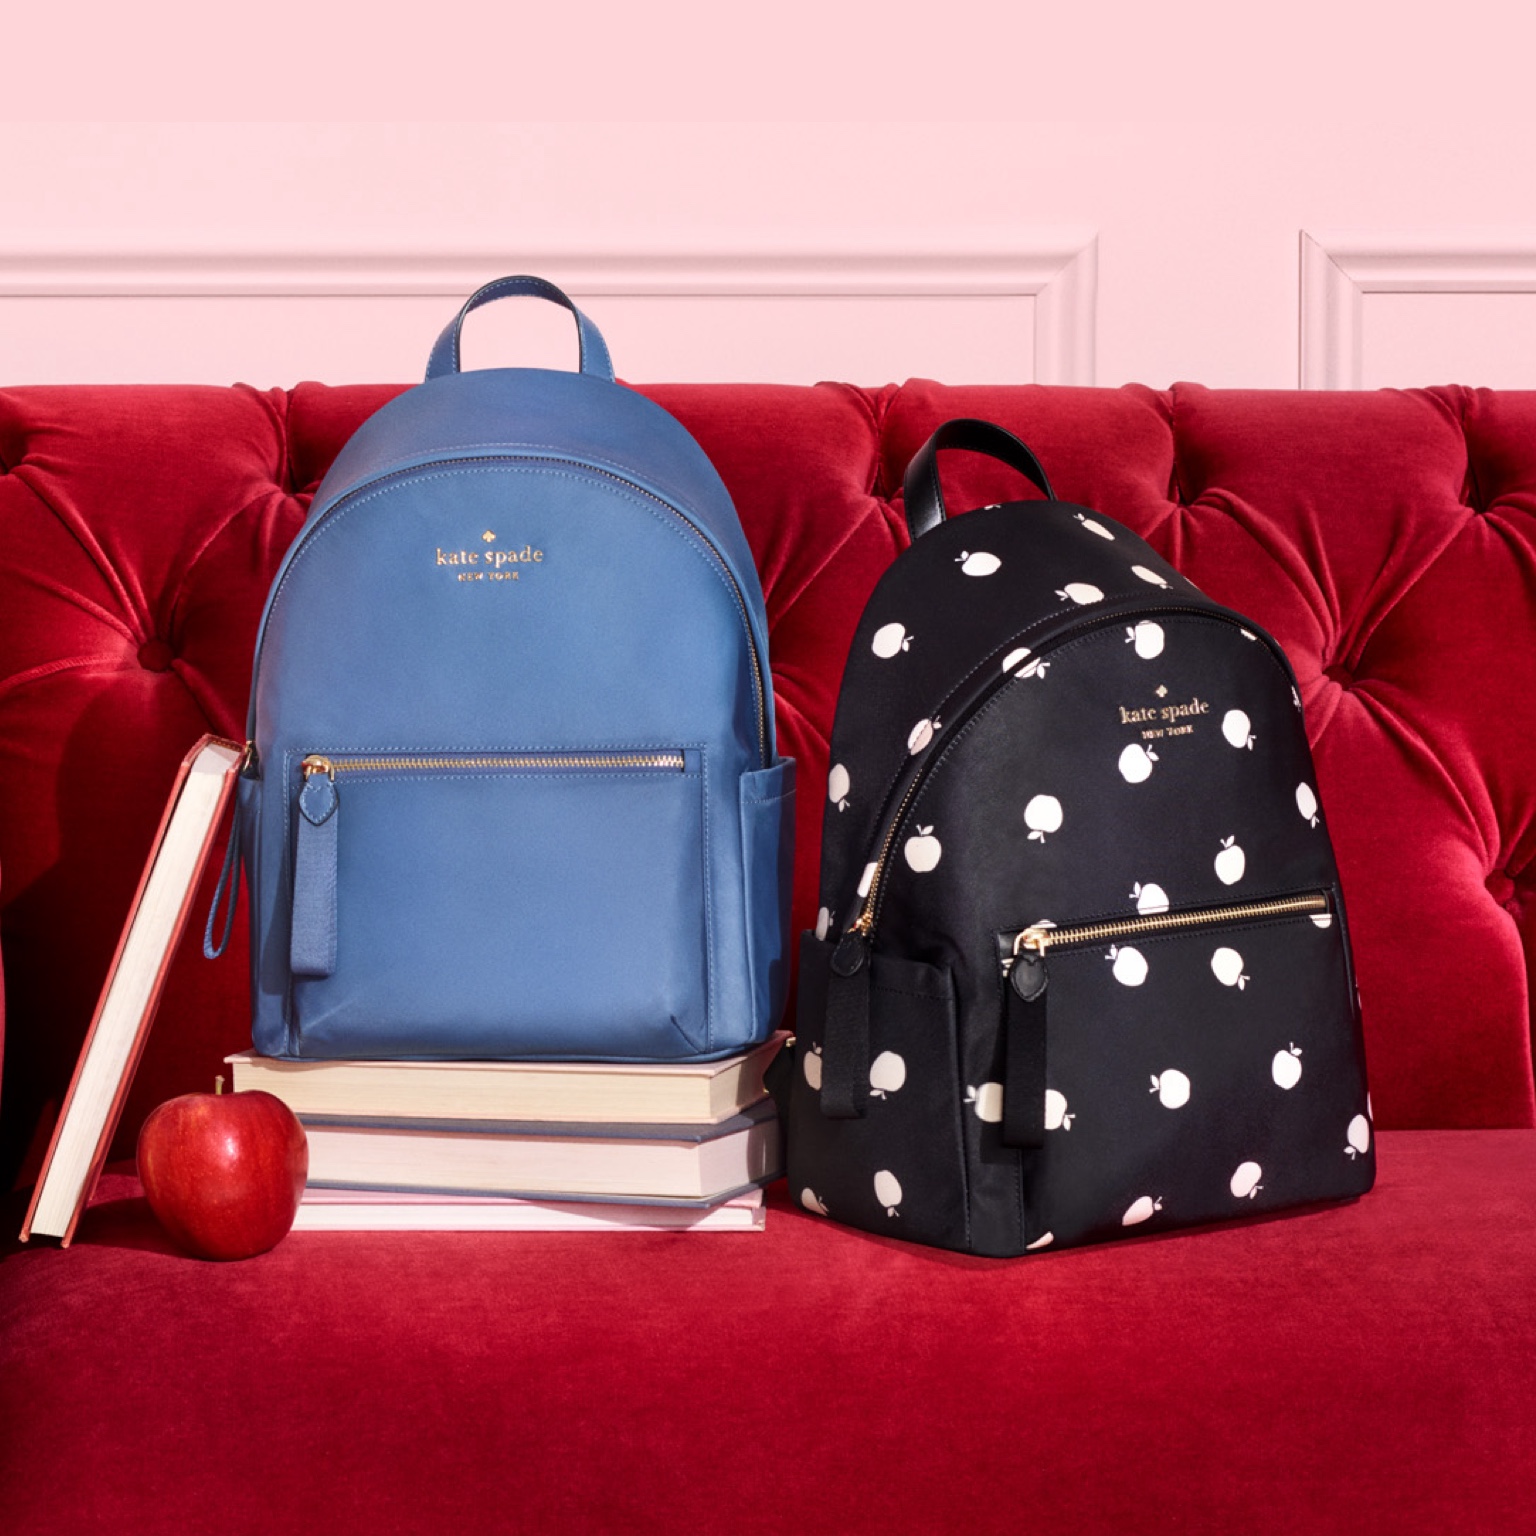 Kate Spade Surprise Official Site – Up to 75% Off Everything